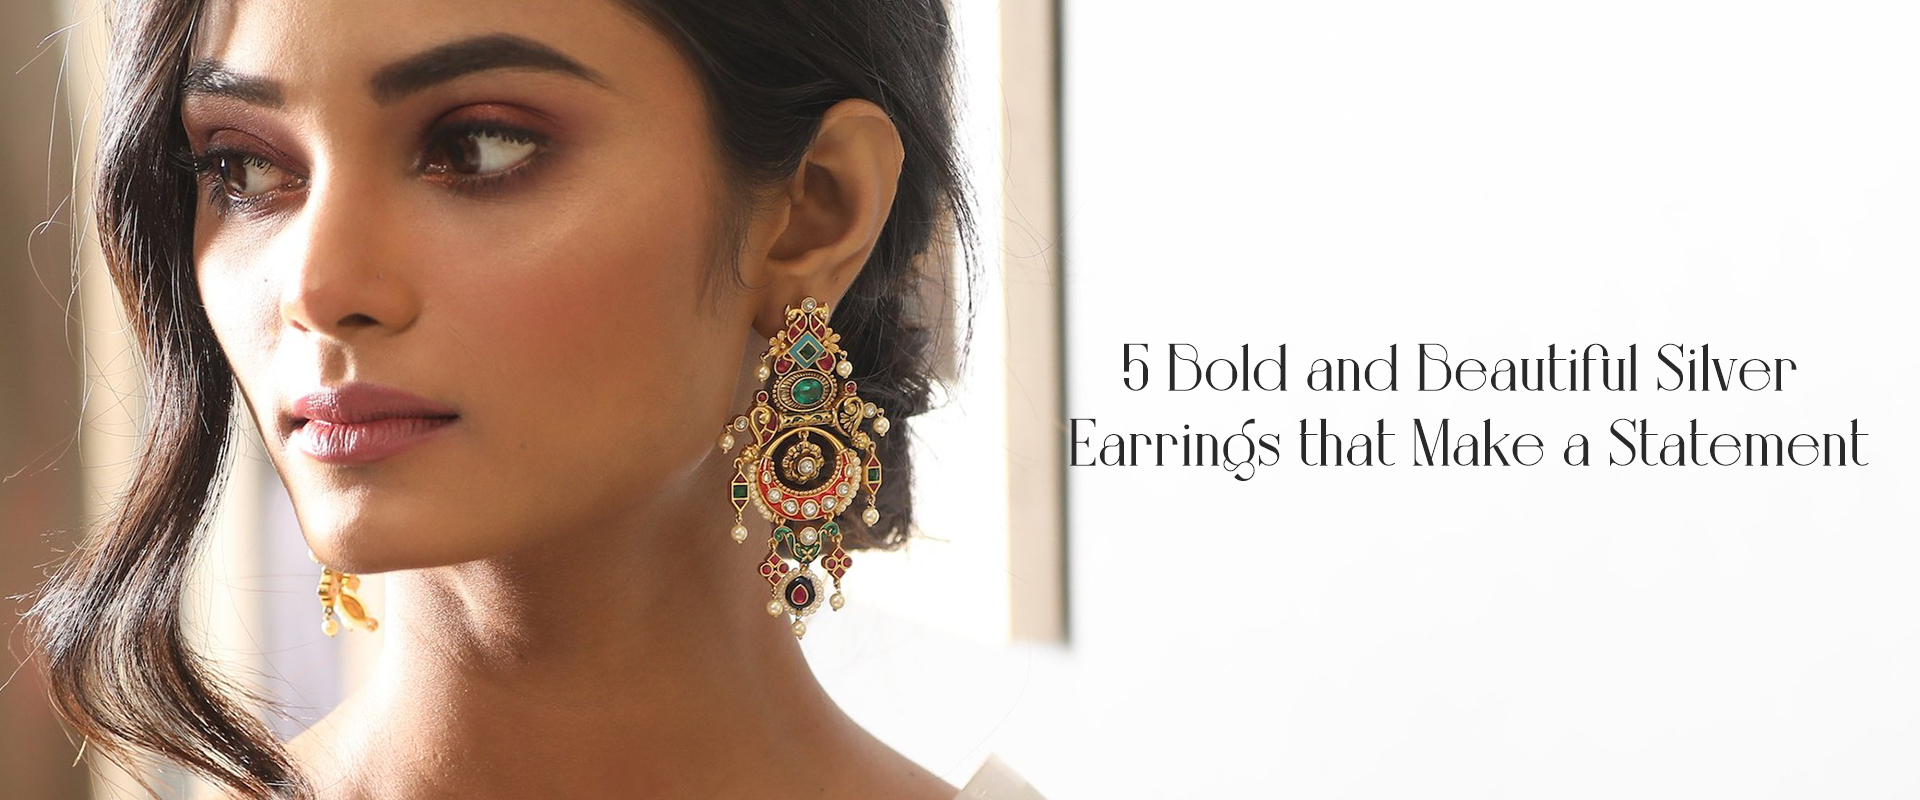 5 Bold and Beautiful Silver Earrings that Make a Statement